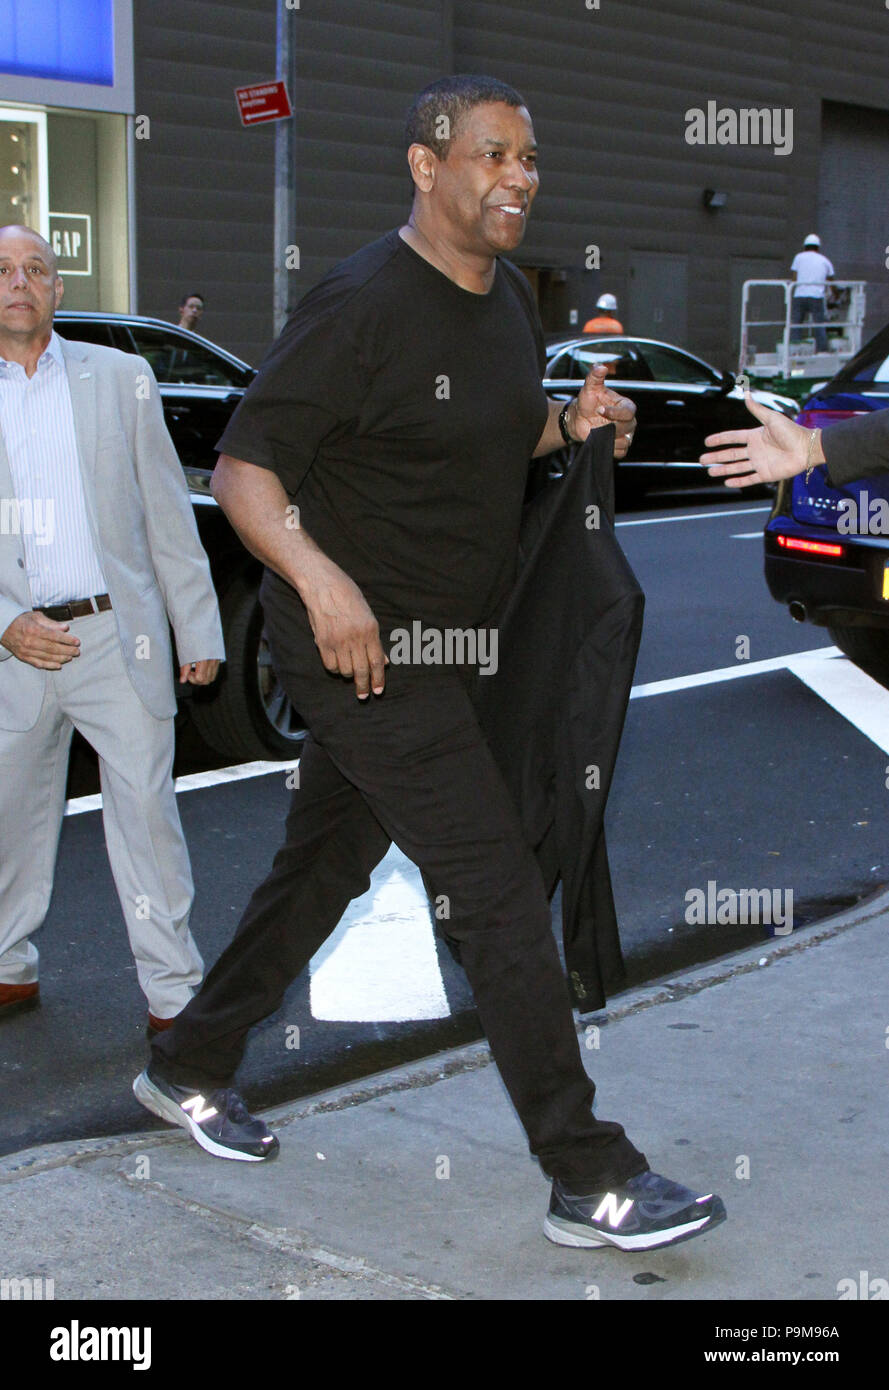 NEW YORK, NY July 19: Denzel Washington seen at Good Morning America  promoting his new movie The Equalizer 2 in New York City on July 19, 2018.  Credit: RW/MediaPunch Credit: MediaPunch Inc/Alamy